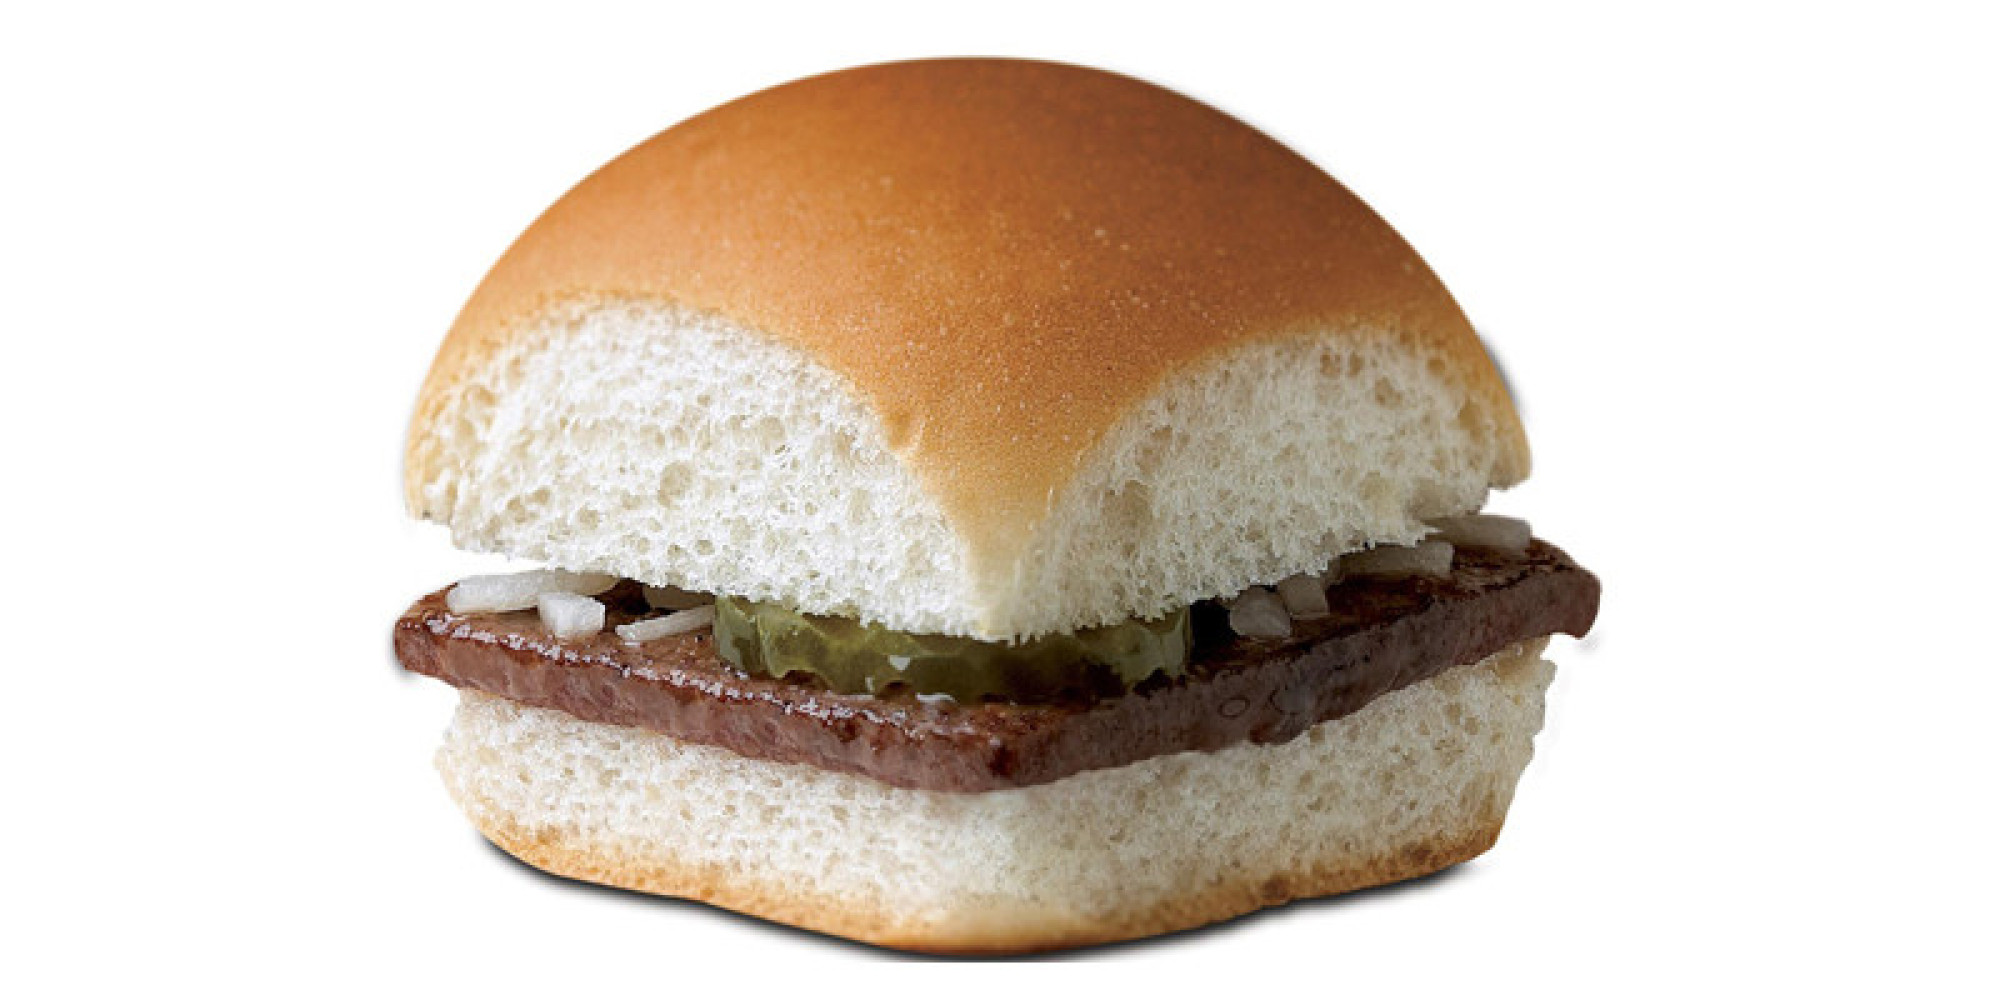 A Definitive Ranking Of Fast Food Menu Items (PHOTOS) HuffPost